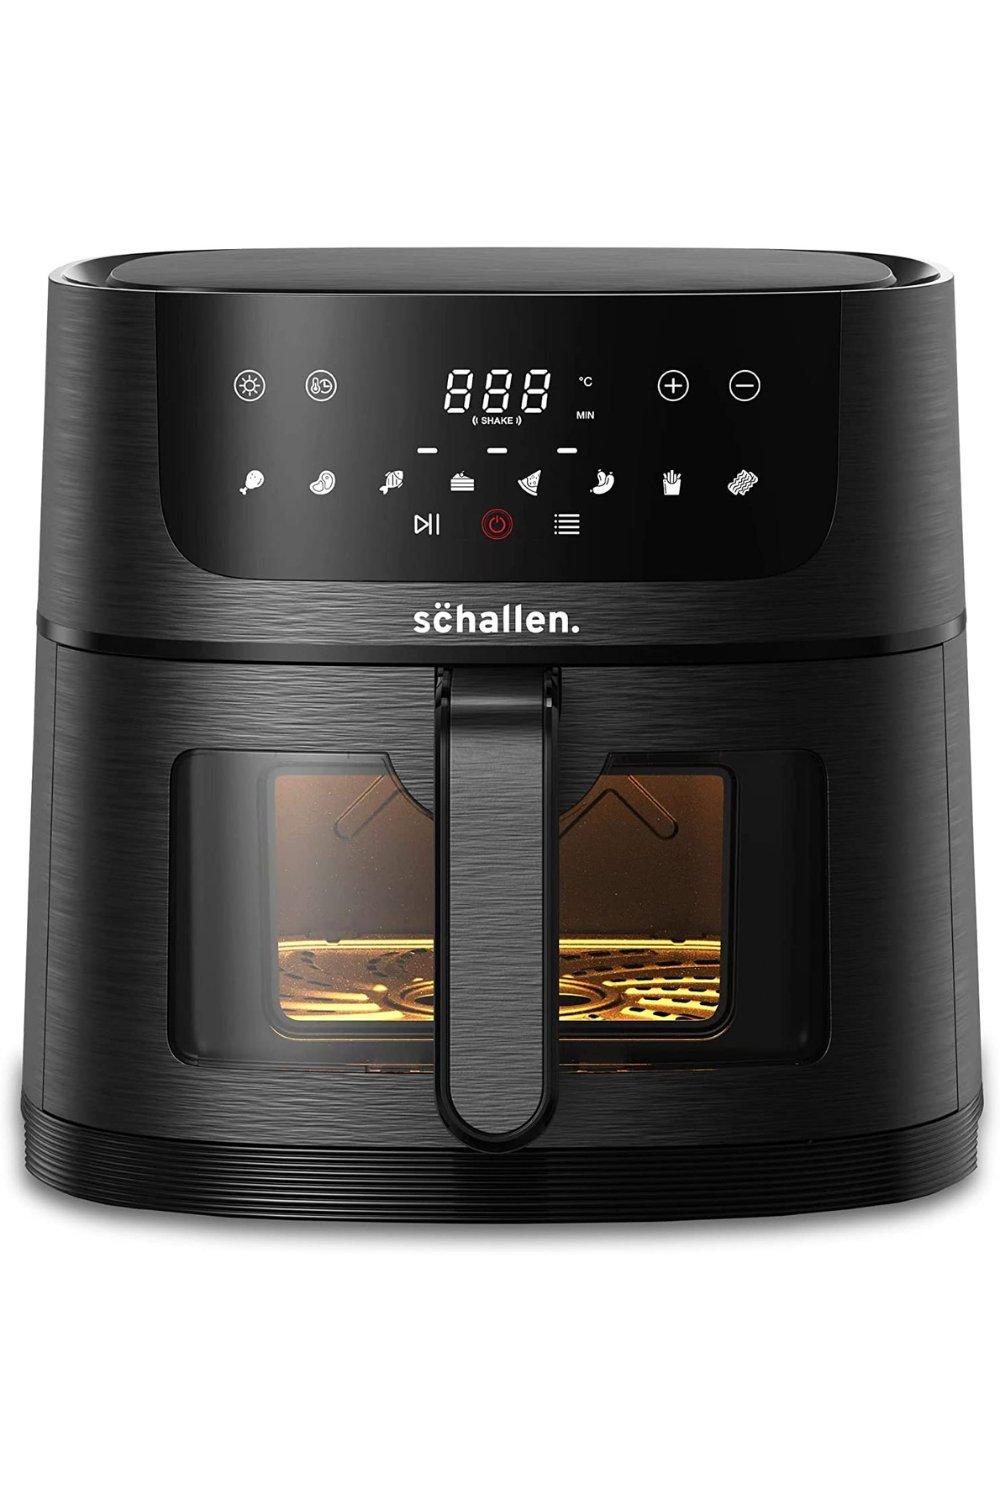 Digital  6L Air Fryer Healthy Eating Low Fat Large Fast Cooking Machine with Touch Screen, Adjustabl